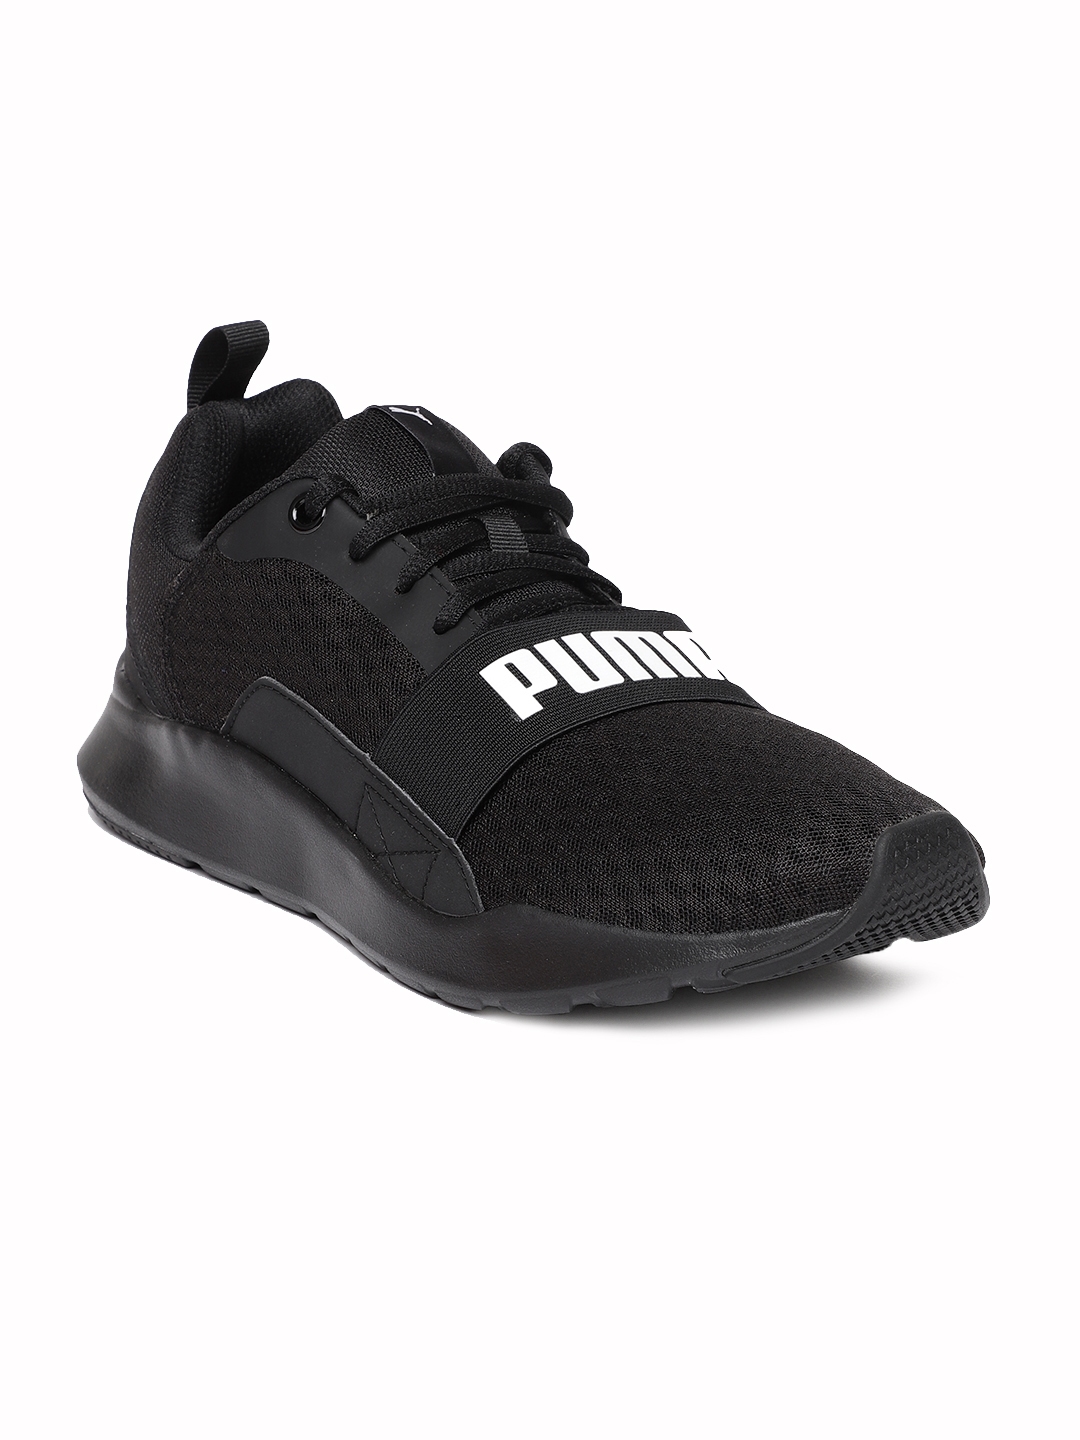 puma wired sneakers review